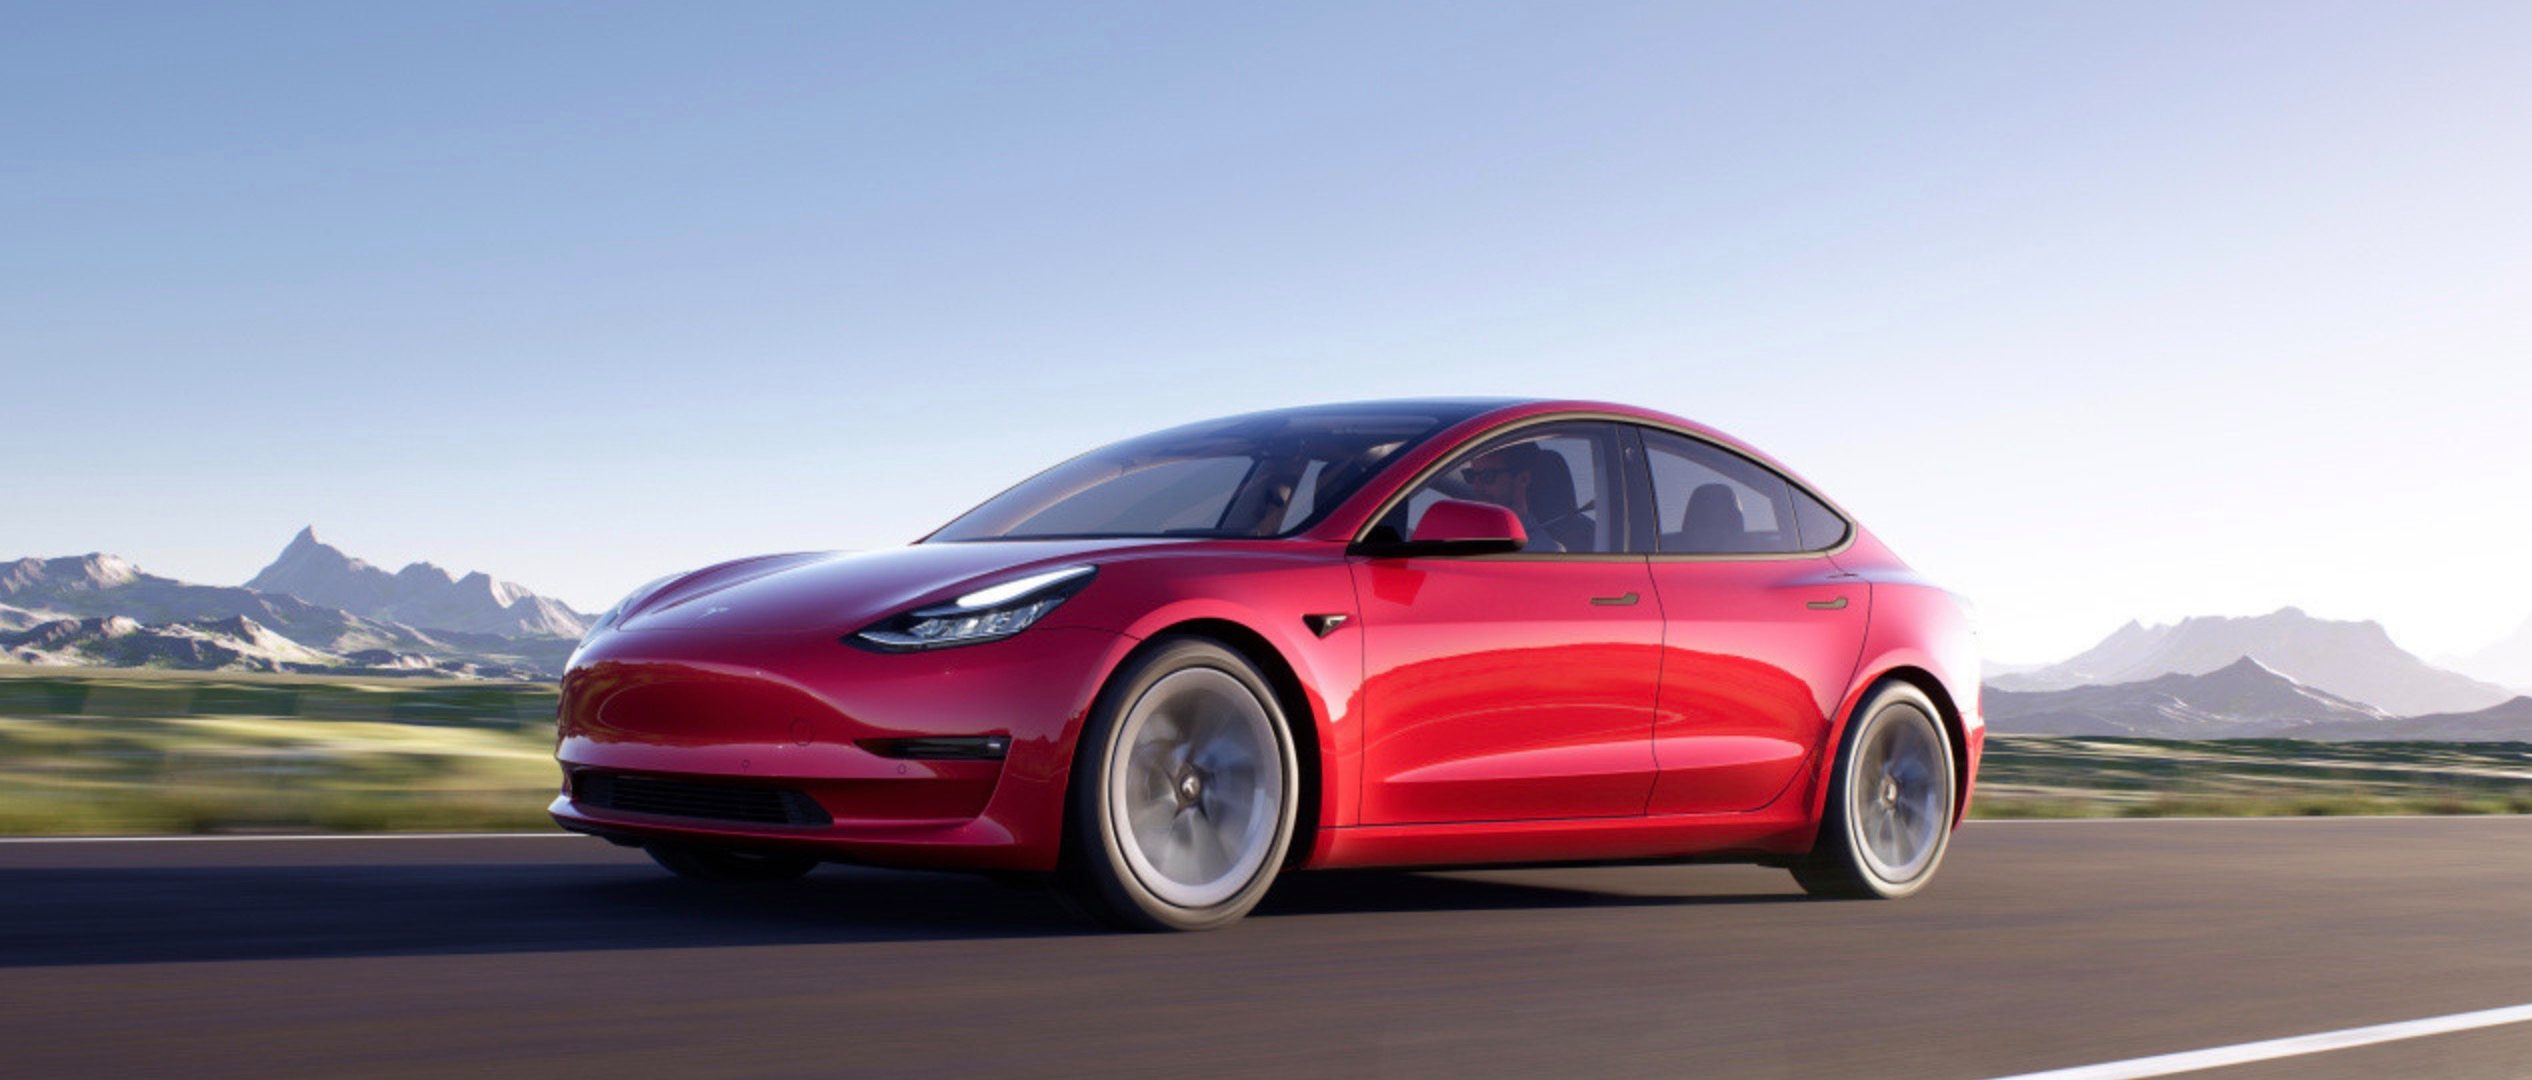 Tesla has stopped selling the Model 3 for $ 35,000 with a new update for 2021